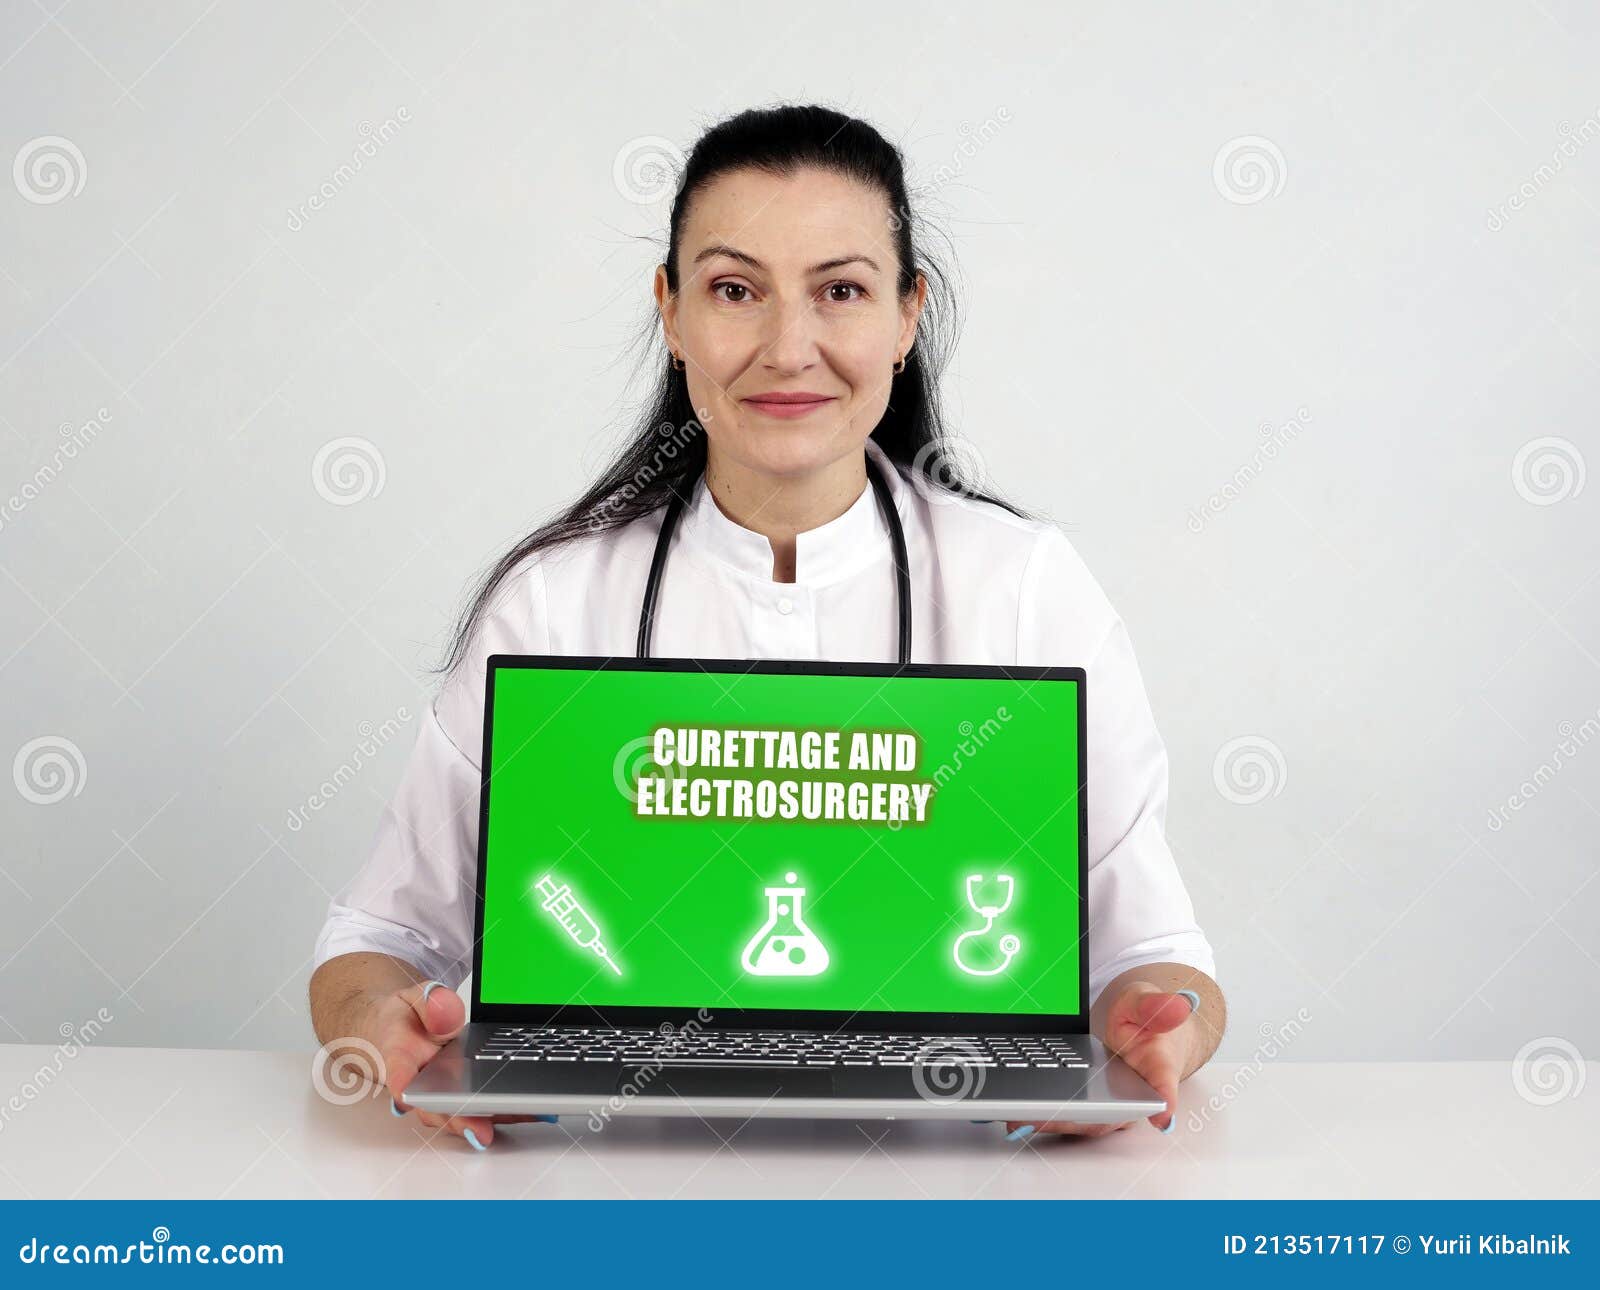 search curettage and electrosurgery button. modern medico use internet technologies